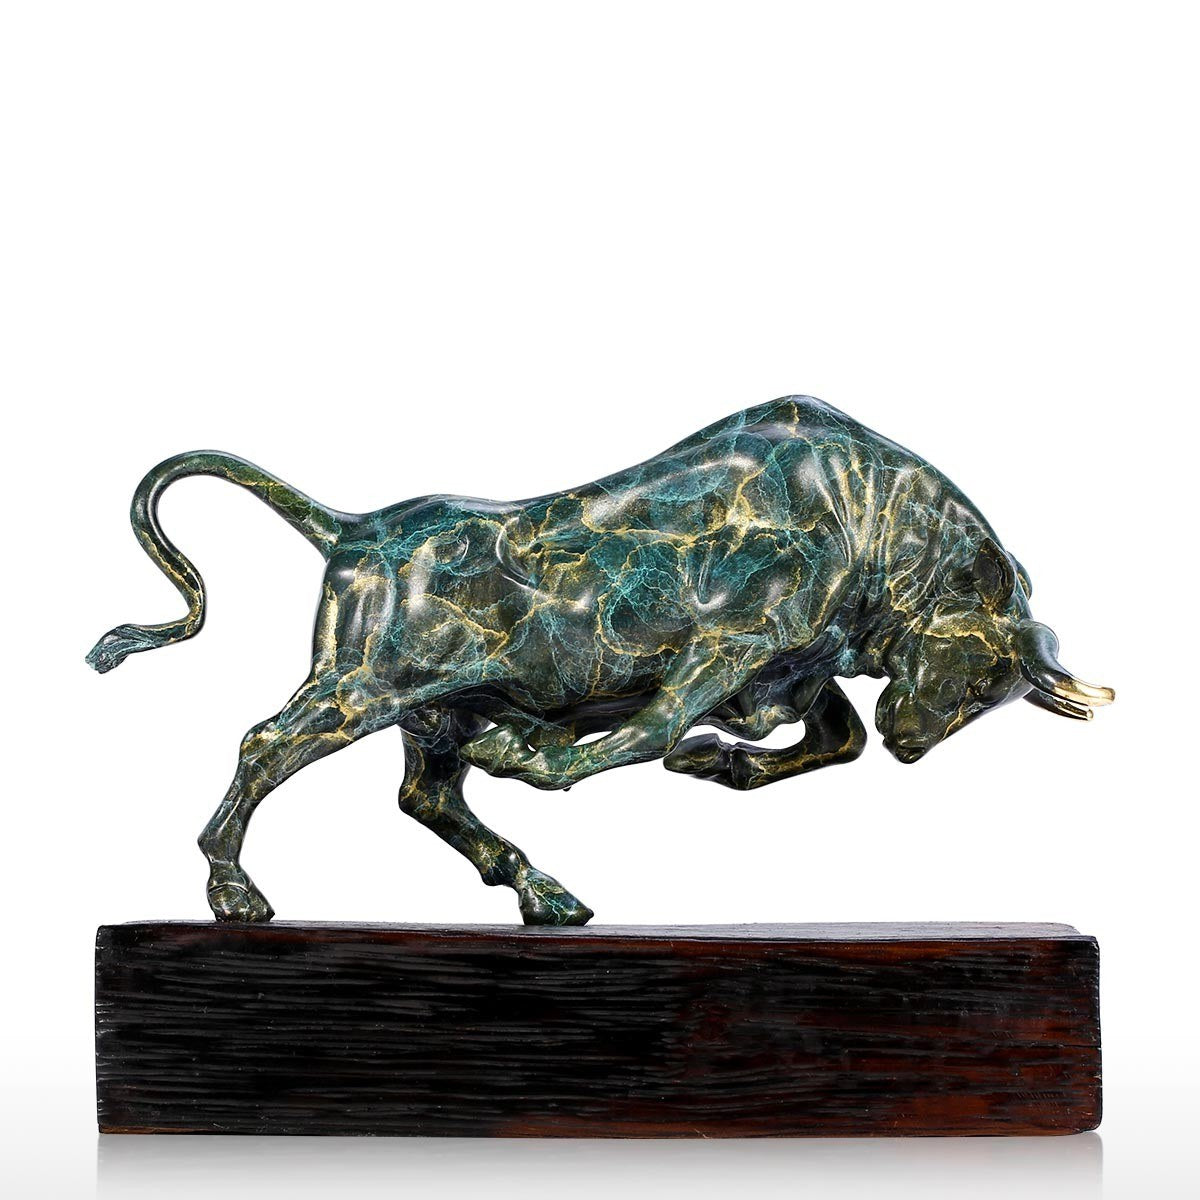 Bull Statue For Sale with Wall Street Bull Statue